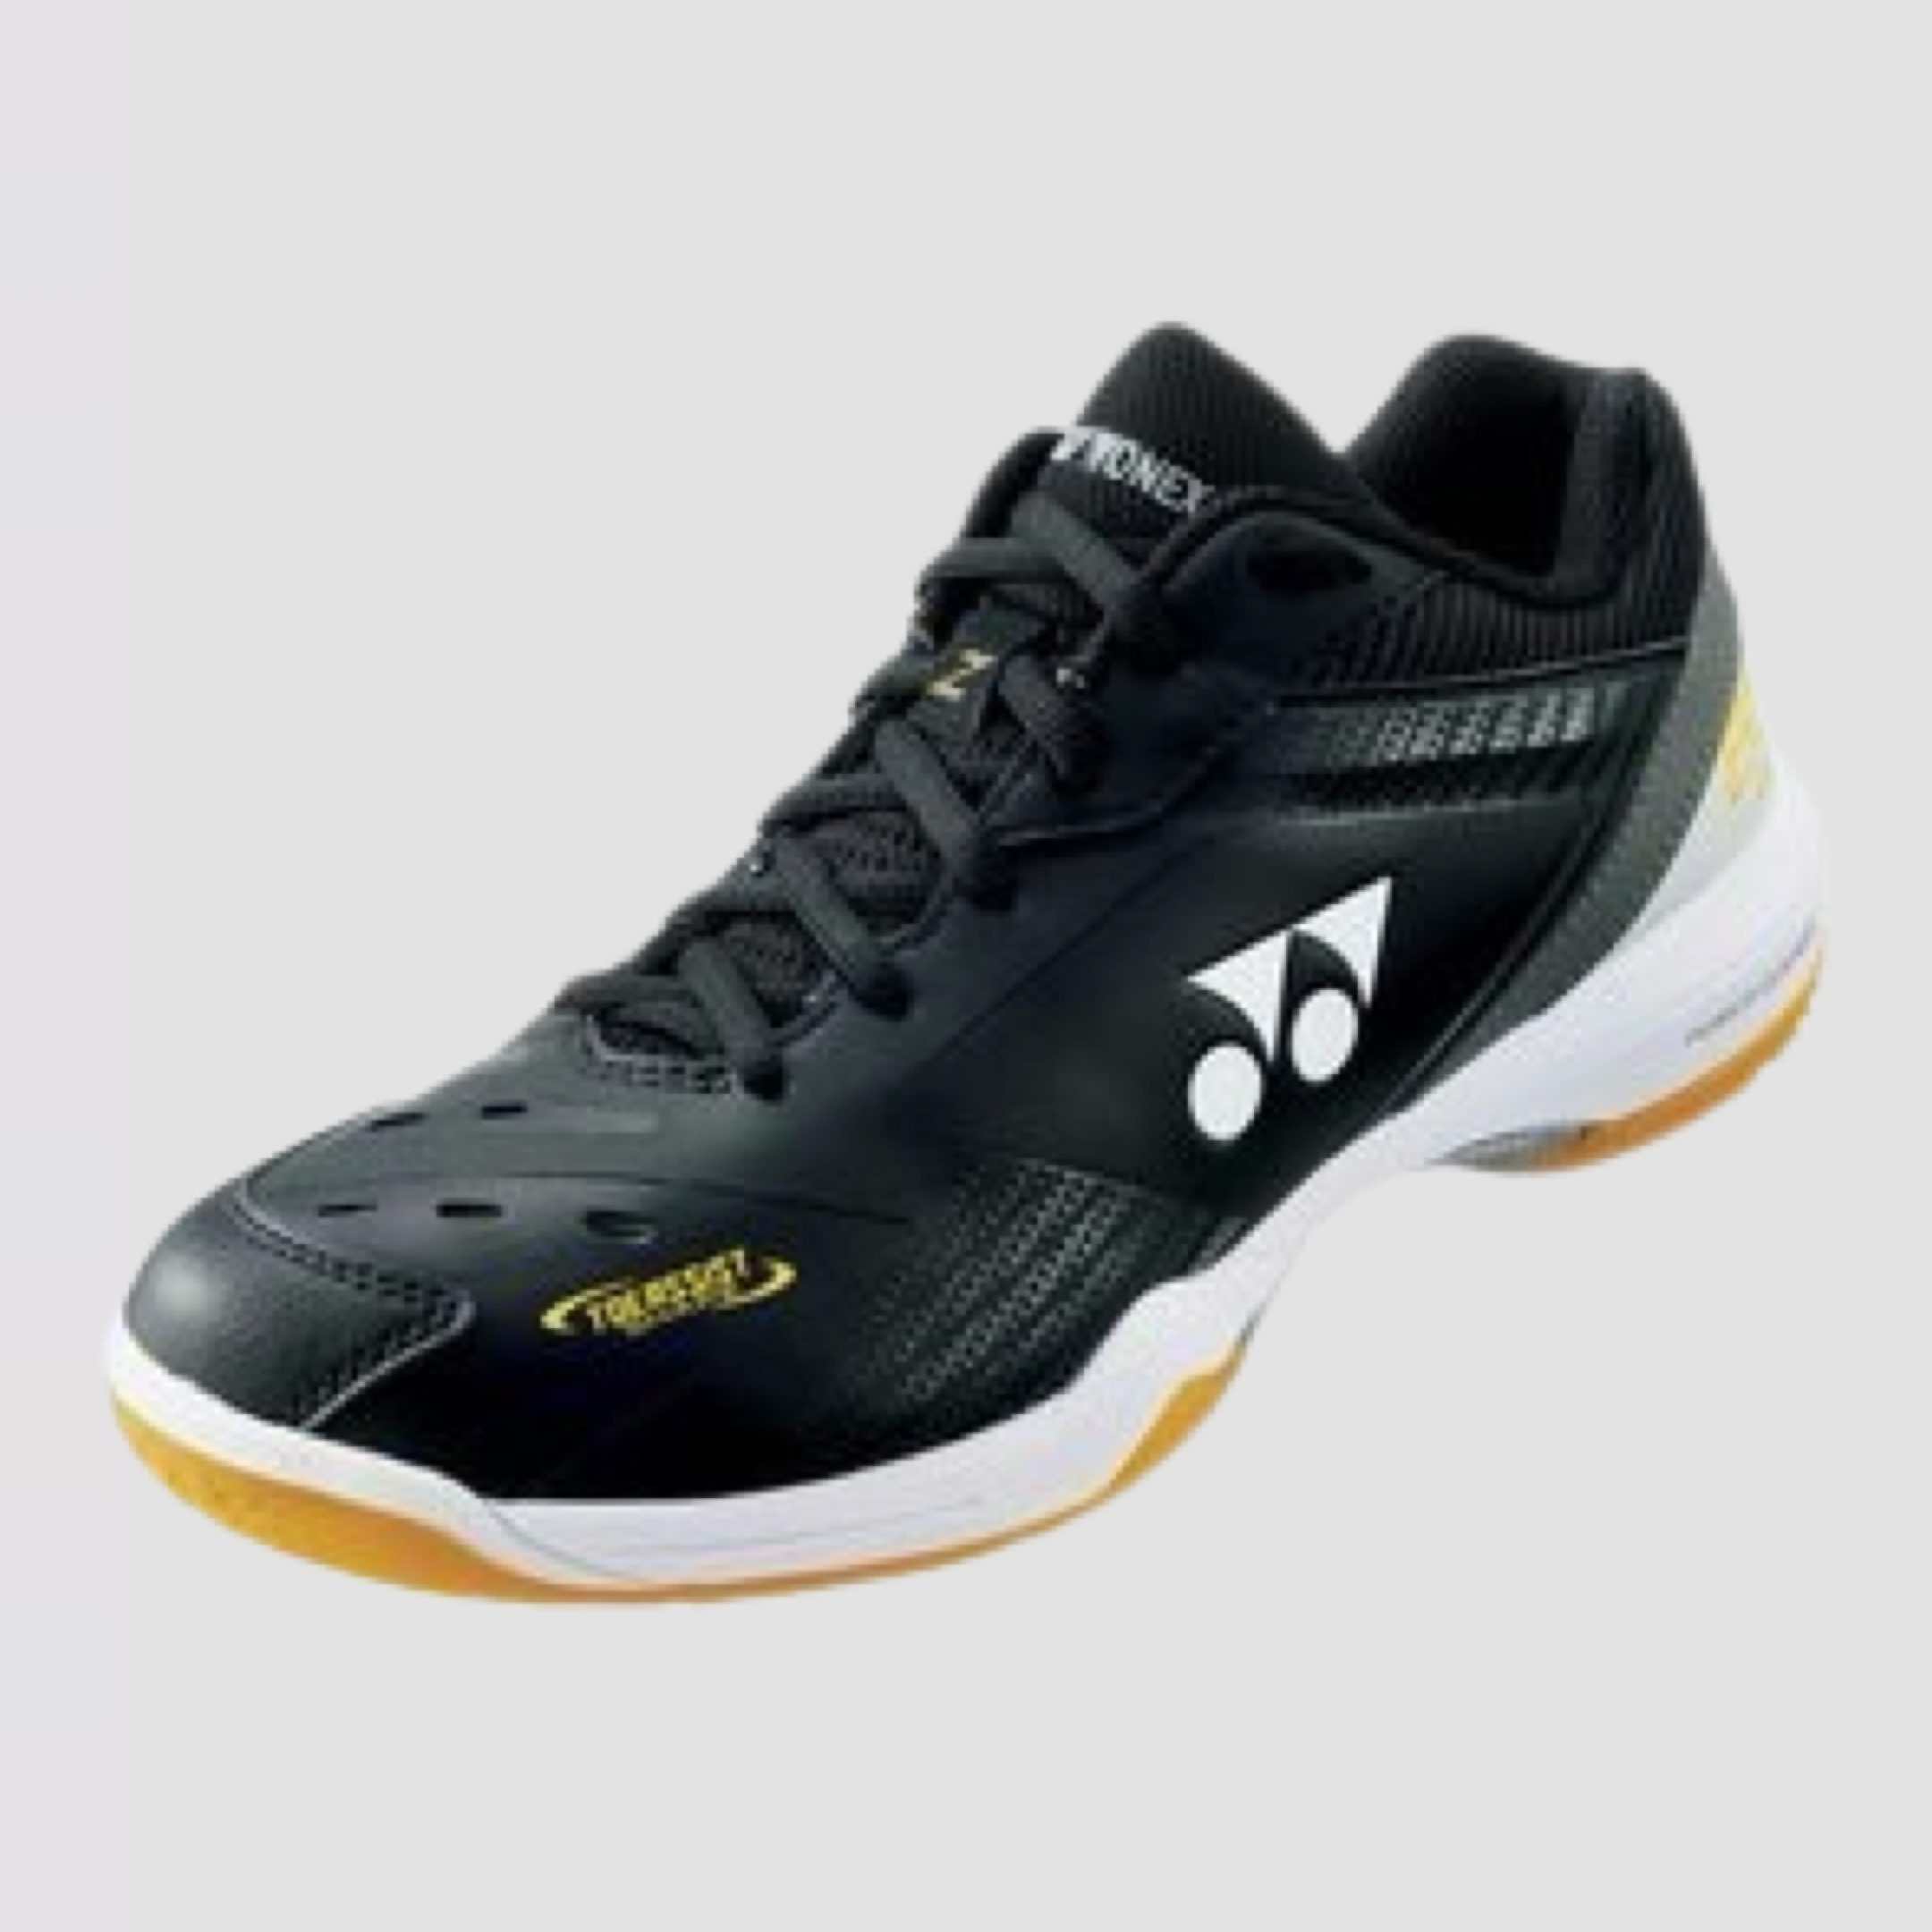 Buy Badminton Shoes Online India at Lowest Prices